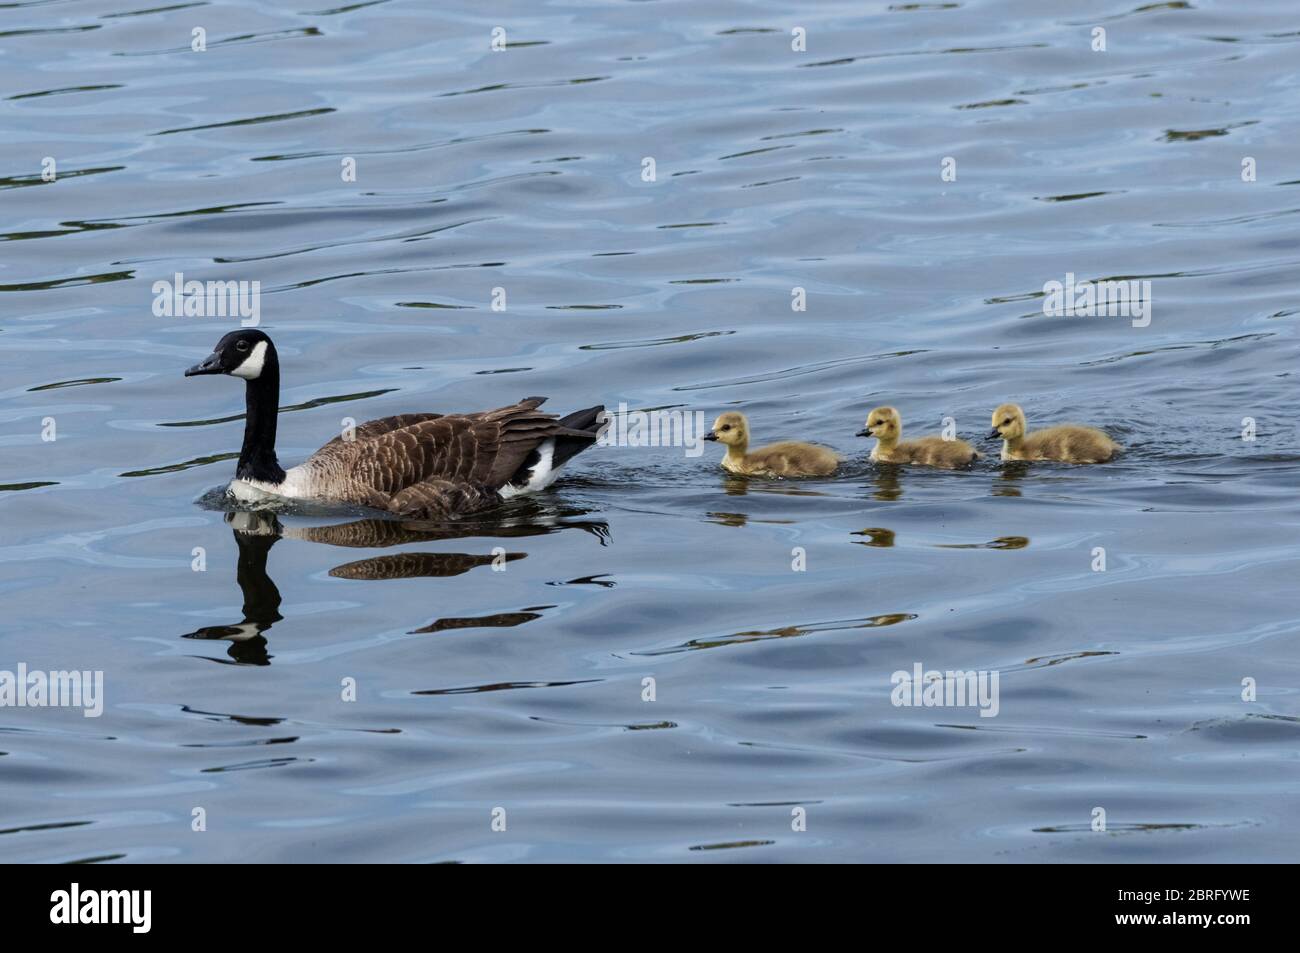 Canada goose with goslings swimming in line Stock Photo